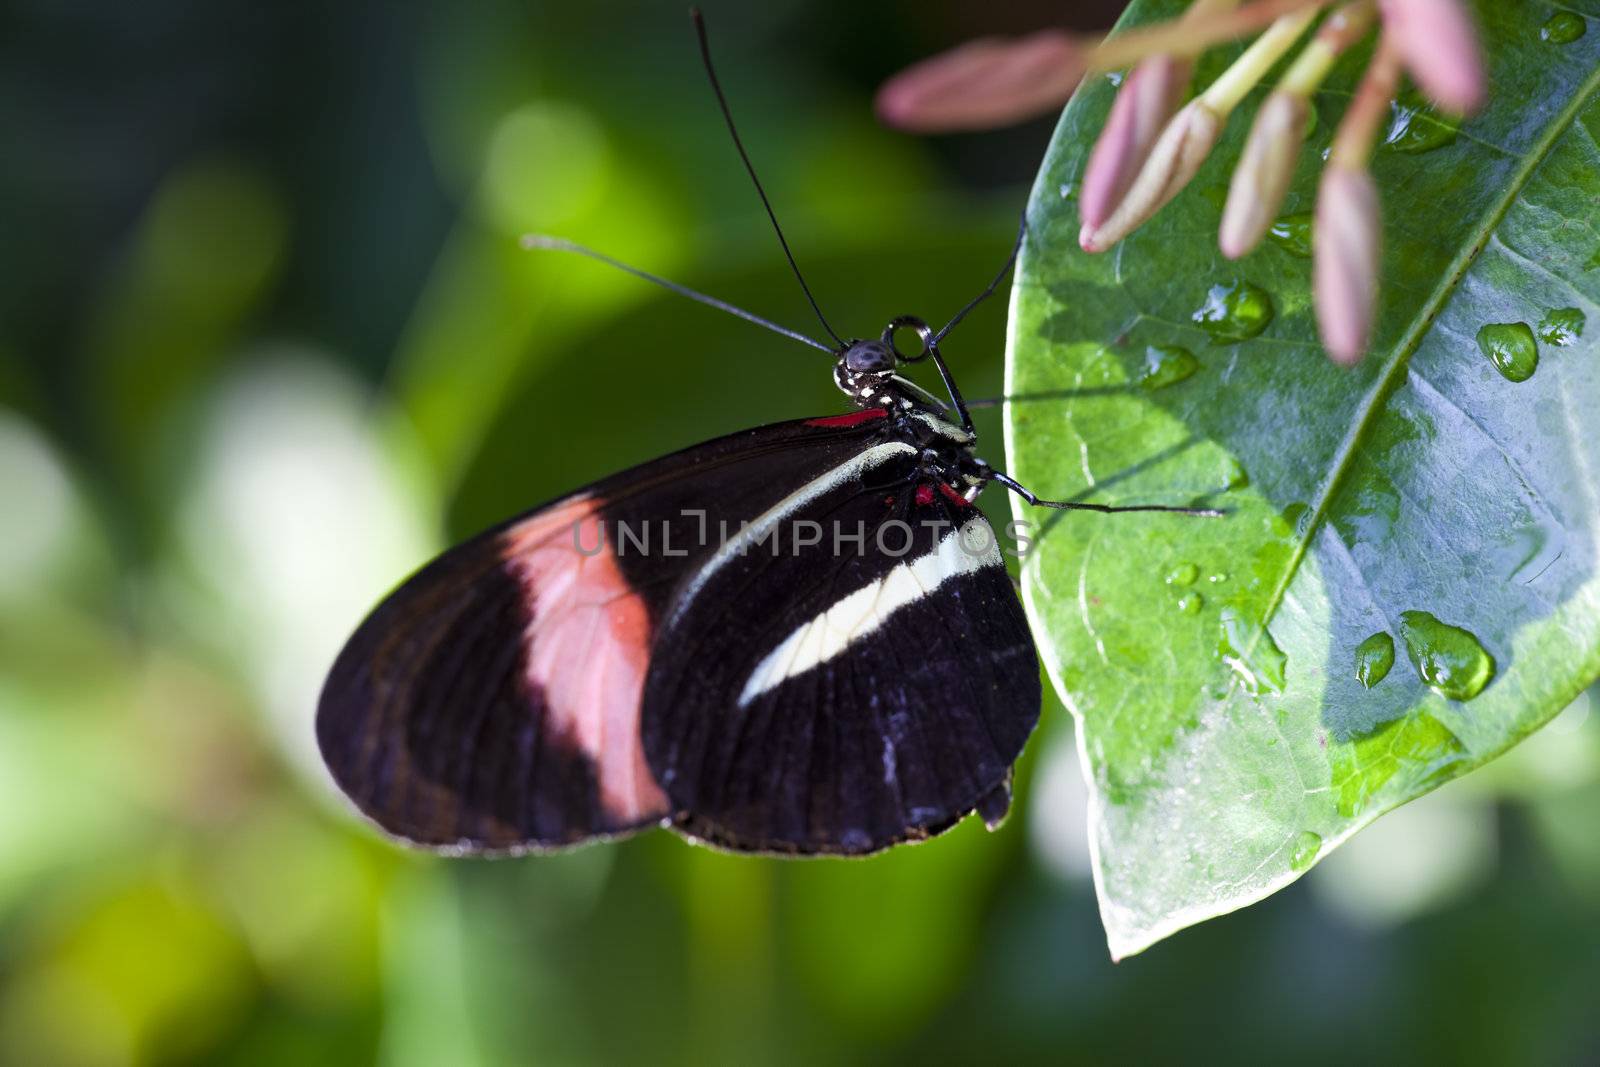 A close up shot of a Red Postman Butterfly (Heliconius erato).